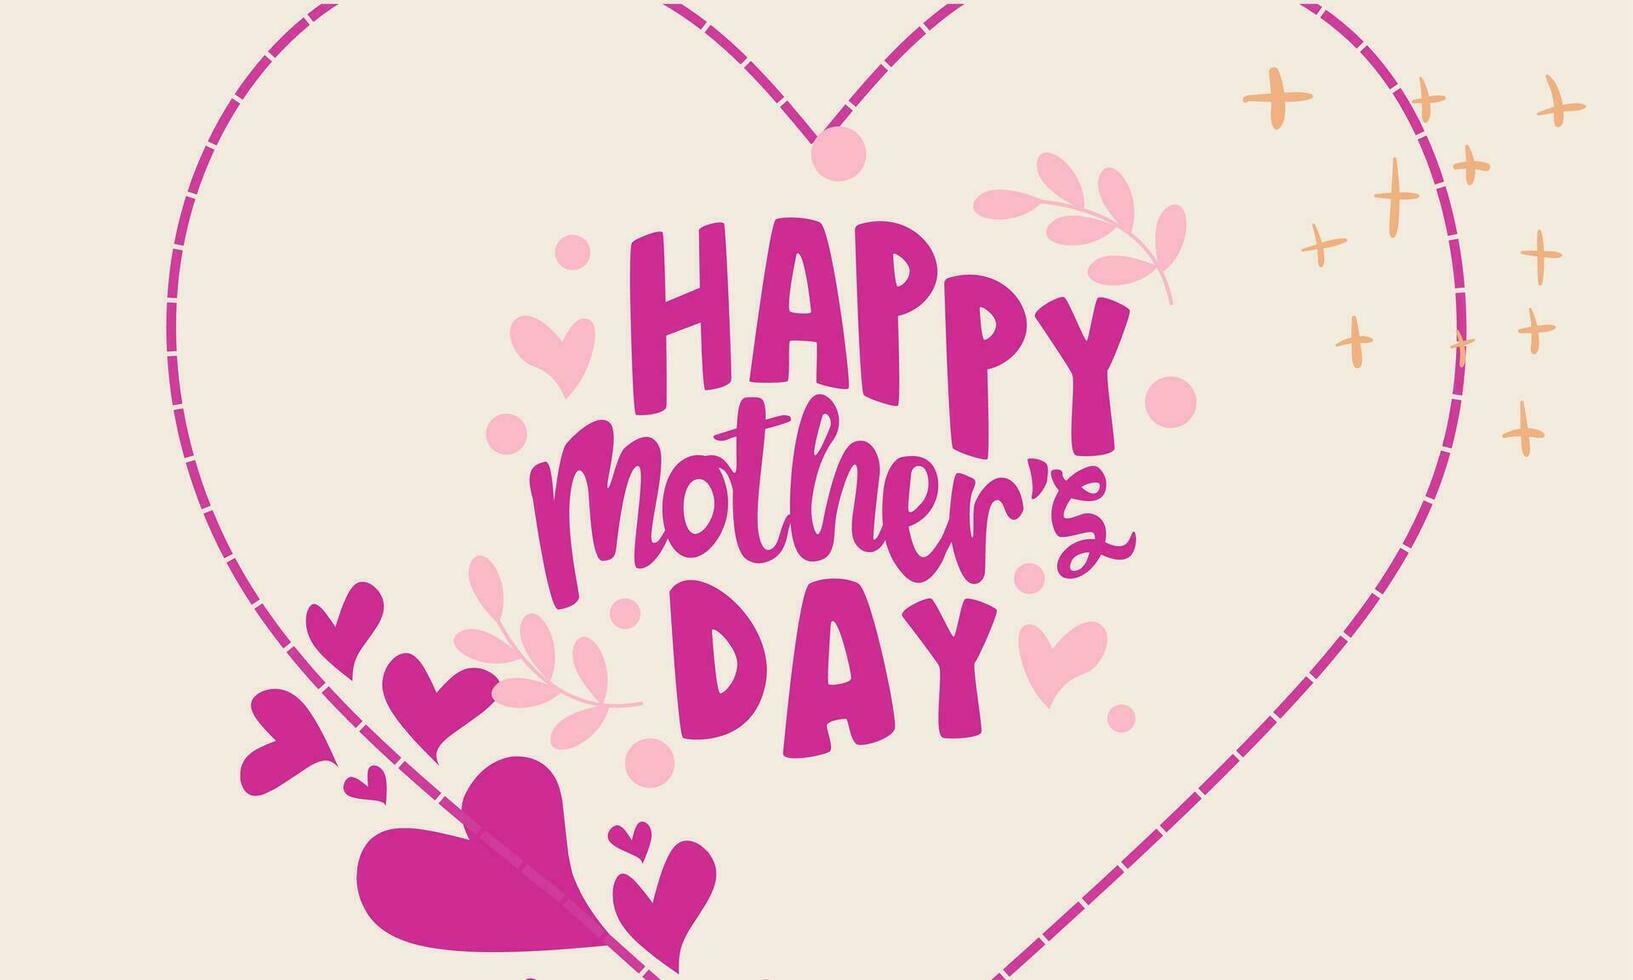 Happy mother's Day poster and banner template with cute illustration on classic background. Vector illustration for greeting card, shop, invitation